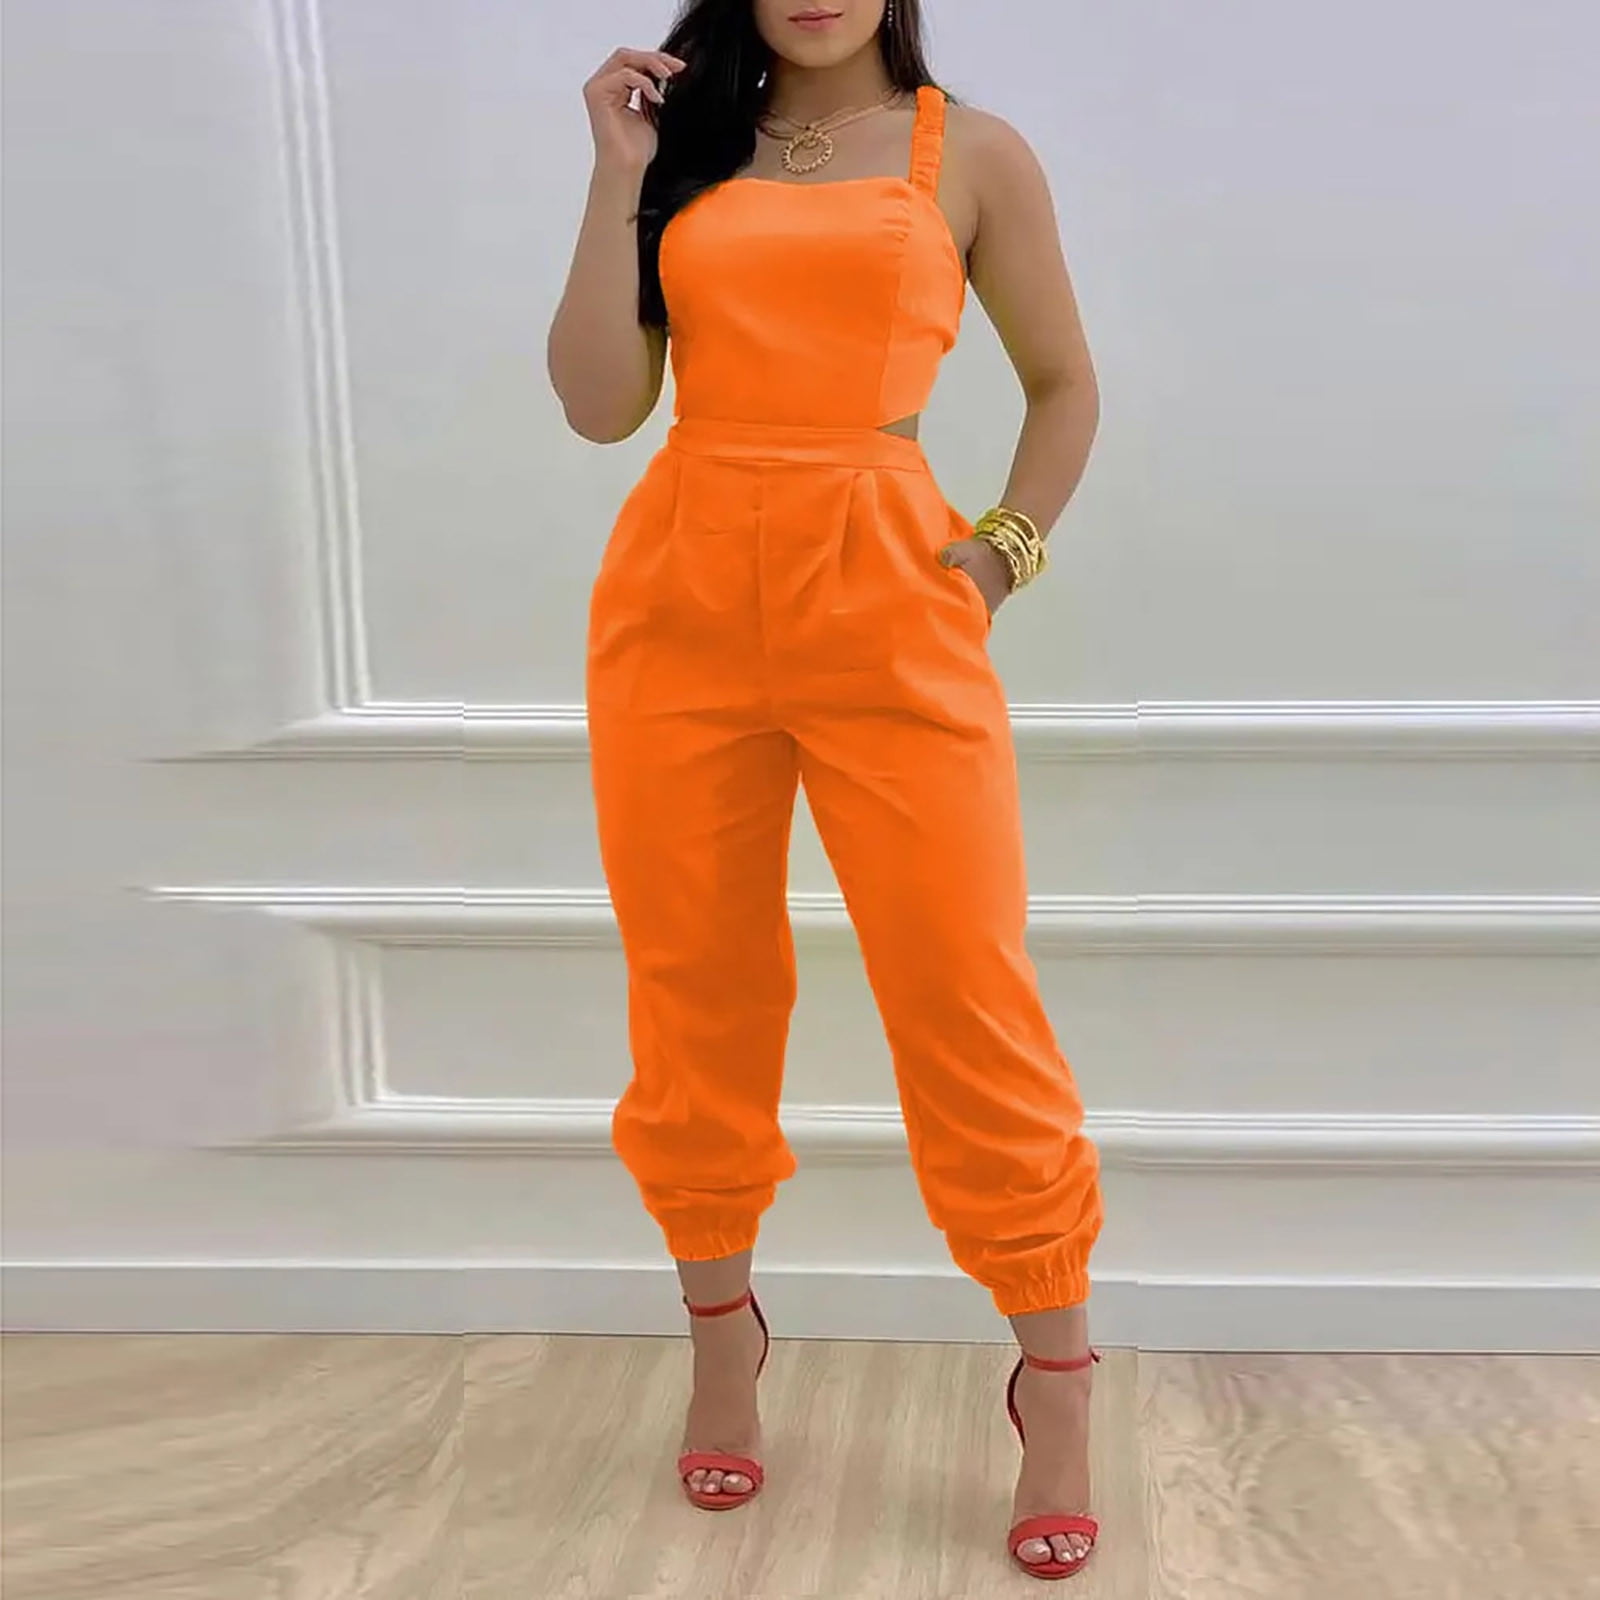 Tawop Women'S Jumpsuits Women'S Overalls With Suspenders And Printing  Casual Jumpsuit Lady Overalls